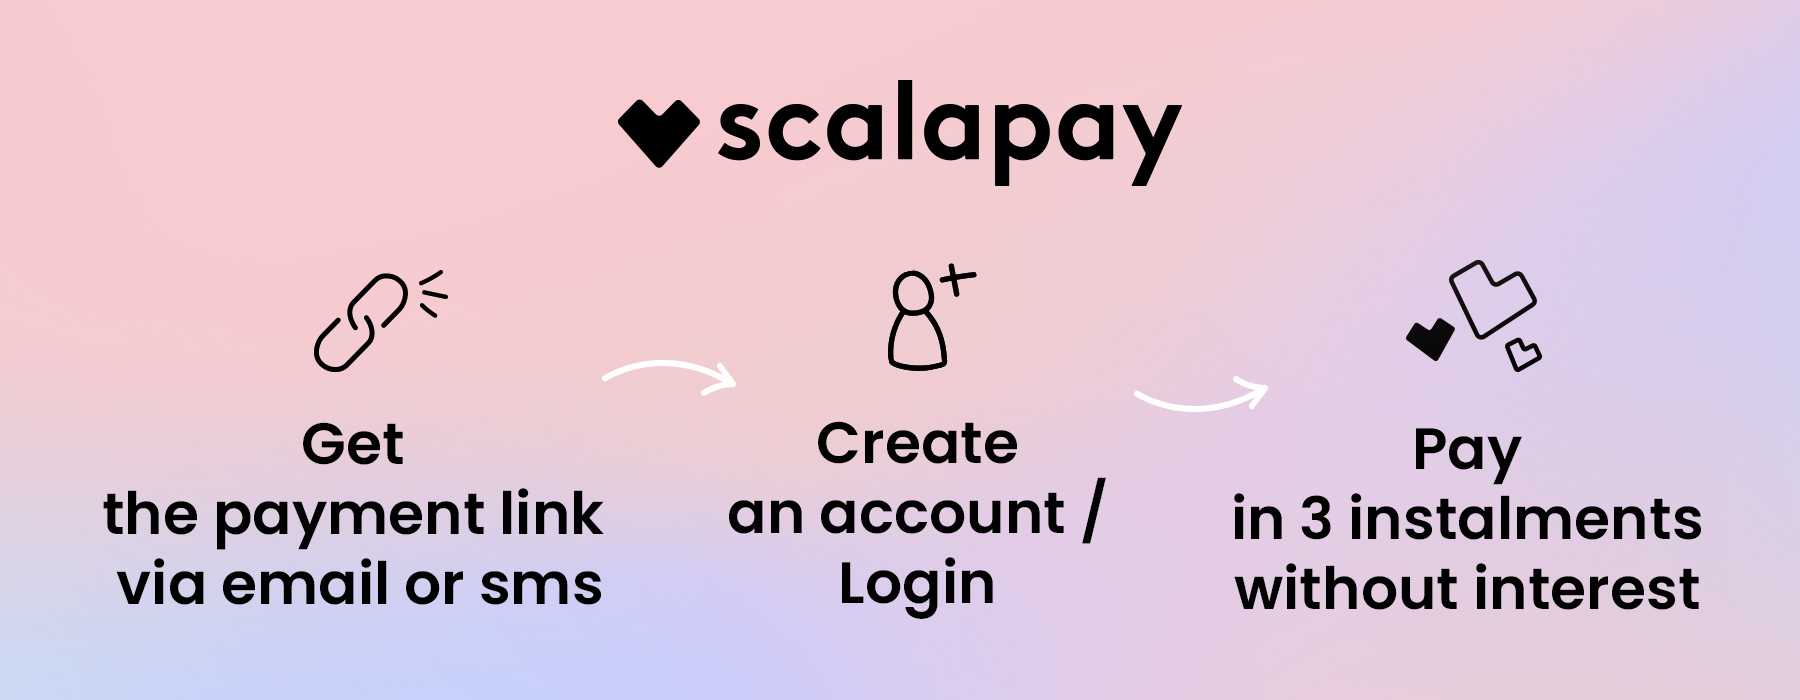 Scalapay Mobile